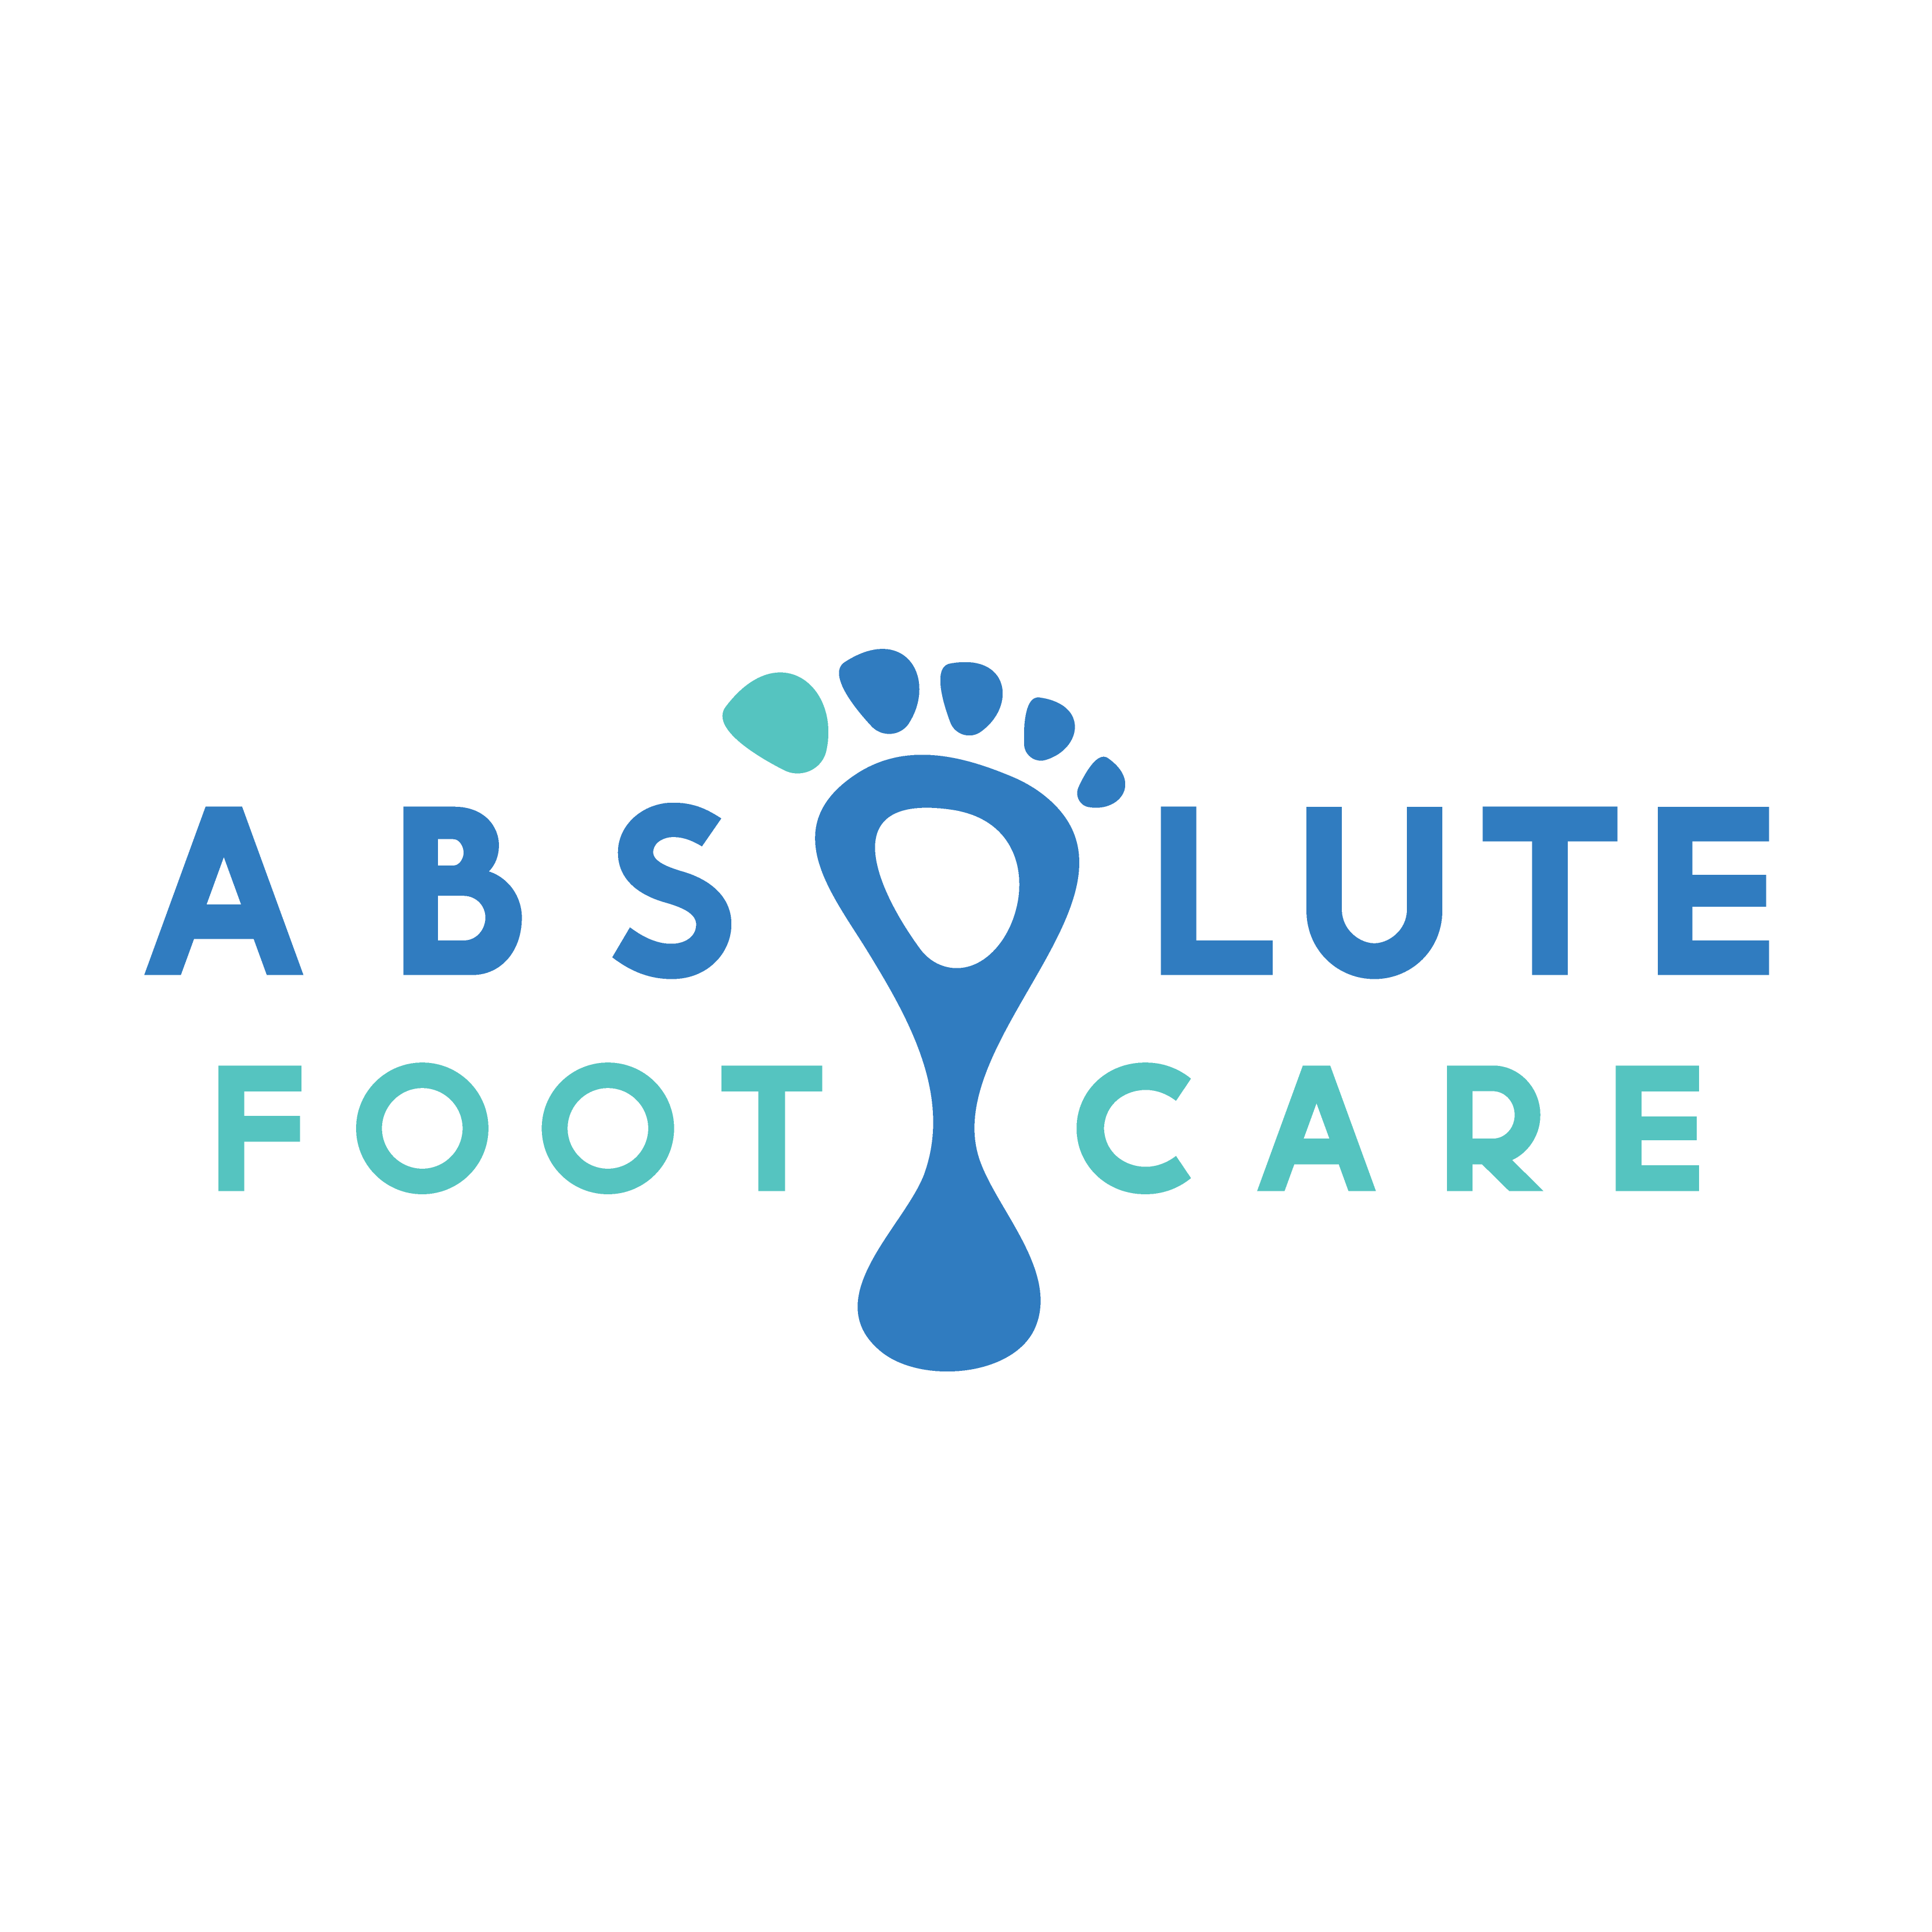 Logo of Absolute Foot Care Chiropodists Podiatrists In Stafford, Staffordshire